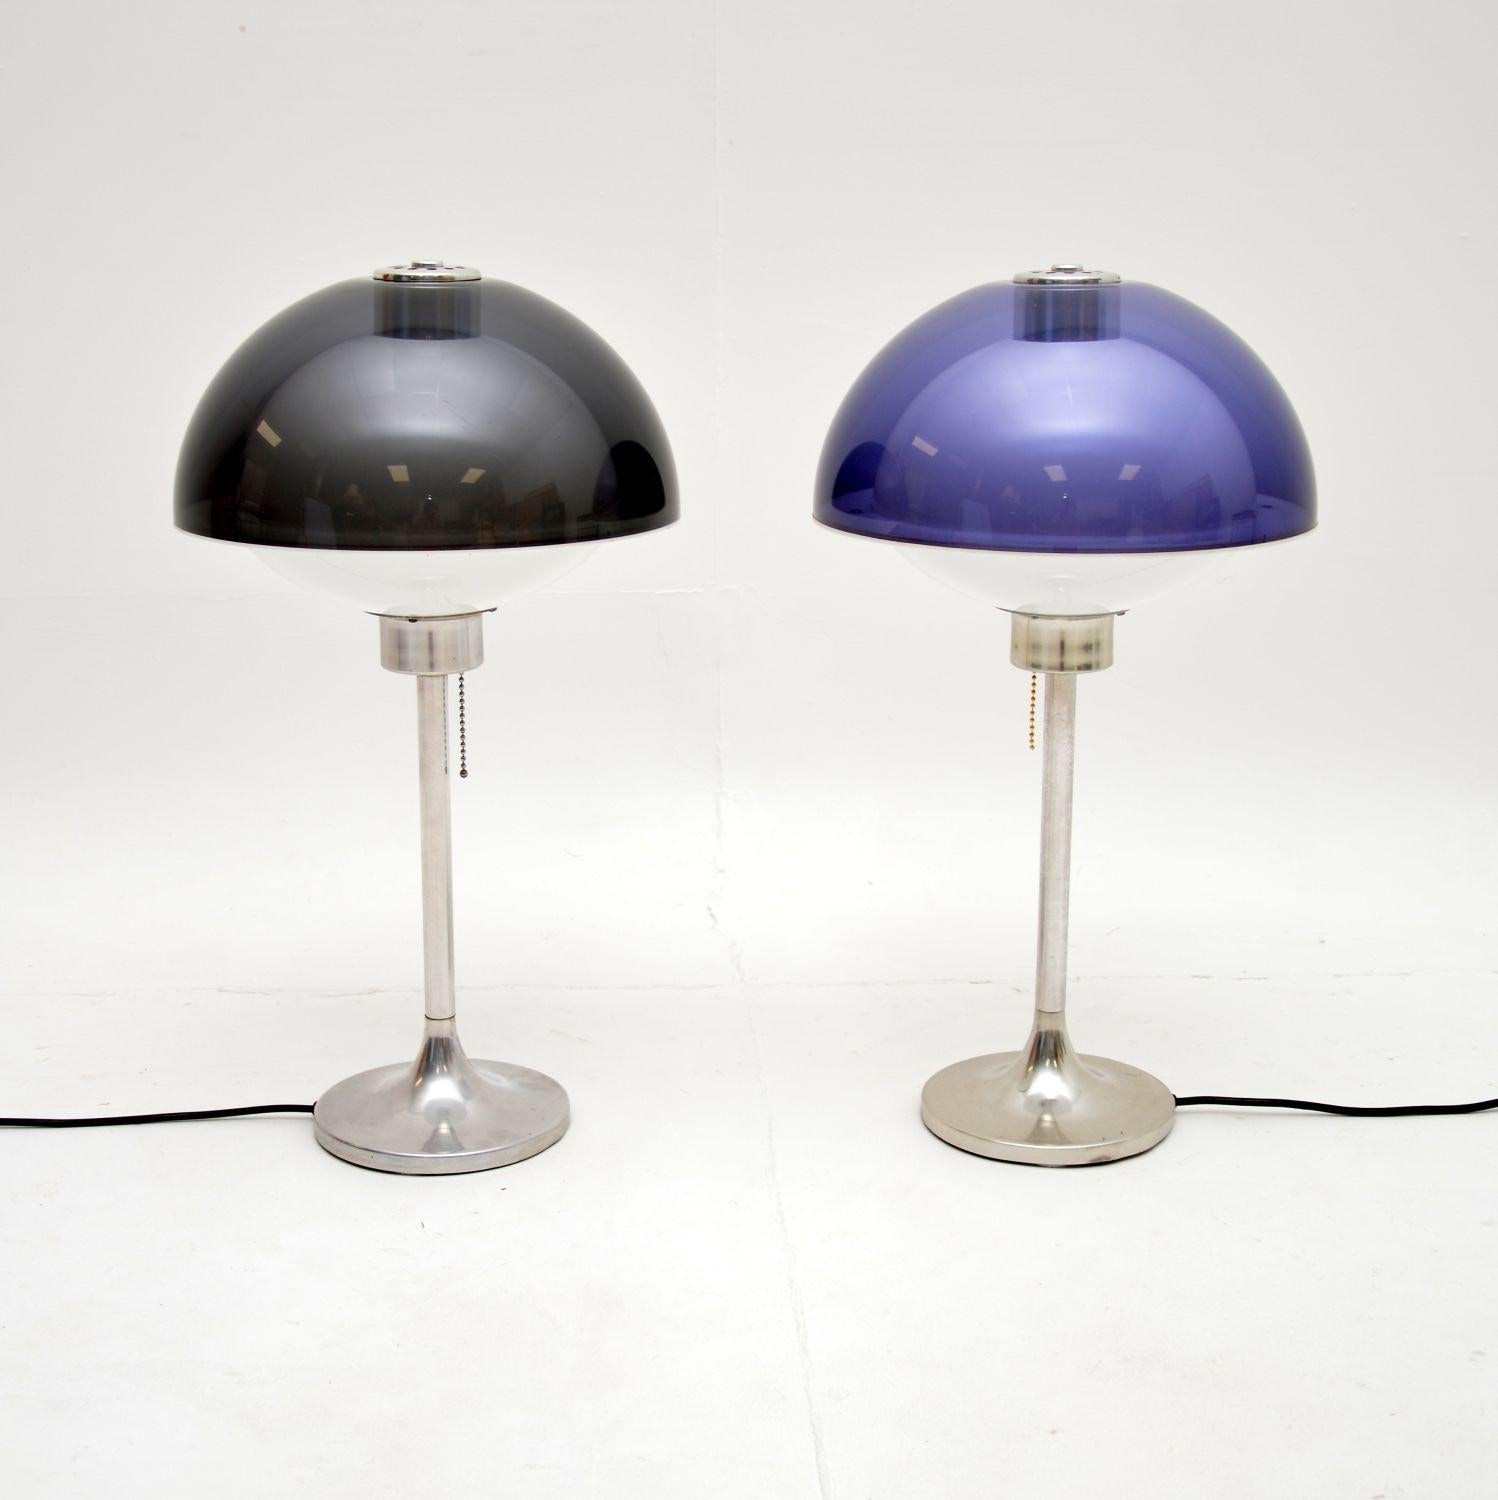 A stunning and very rare pair of vintage “Lumitron” table lamps. They were designed by Robert Welch, they were made in England and date from the 1960’s.

They have a fantastic space age design, with beautiful tinted plastic domed shades, sitting on